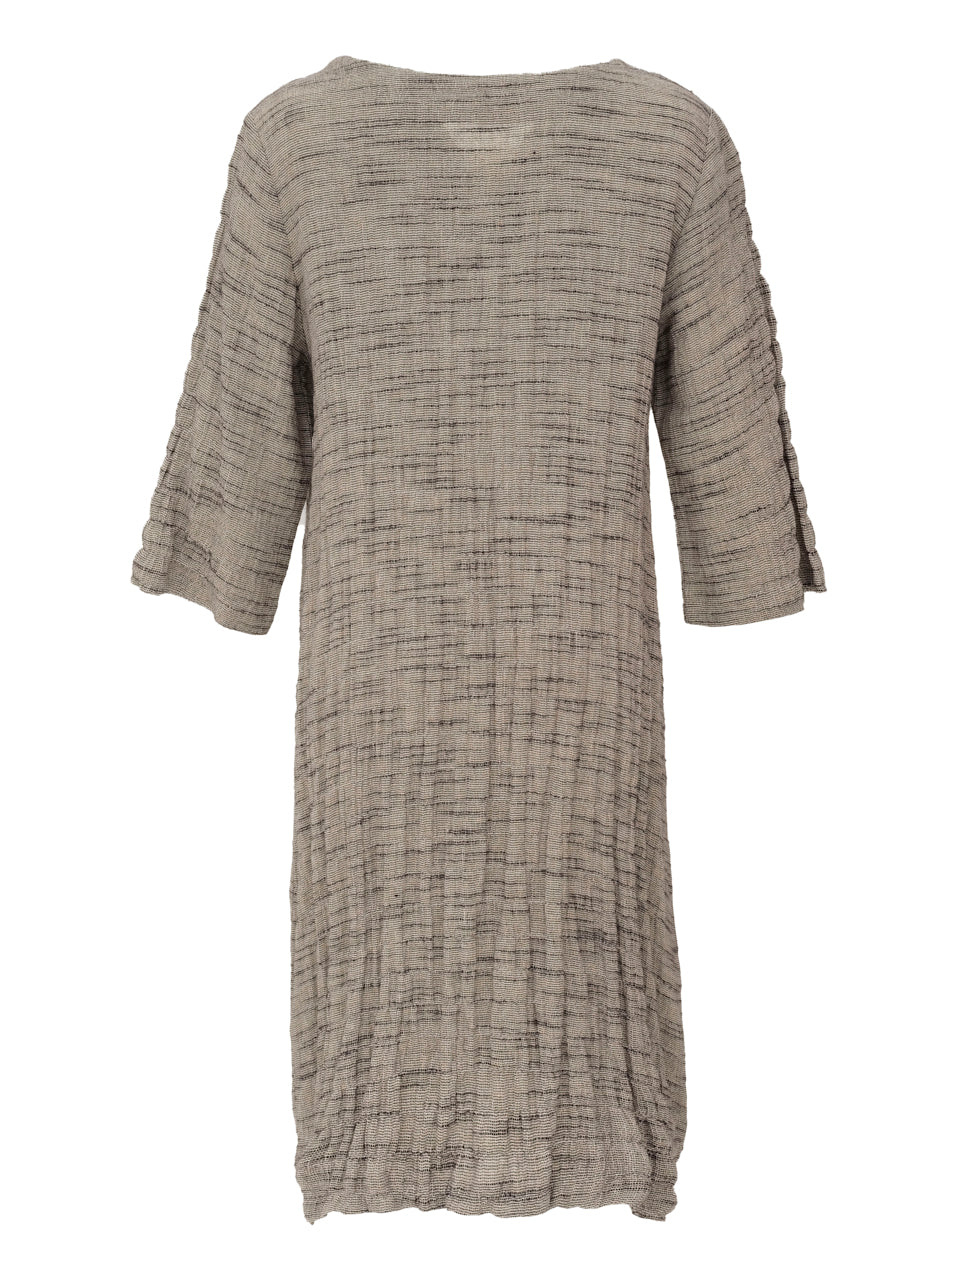 Ever Sassy Spring 2023 women's casual relaxed fitting loose cotton and linen dress - back